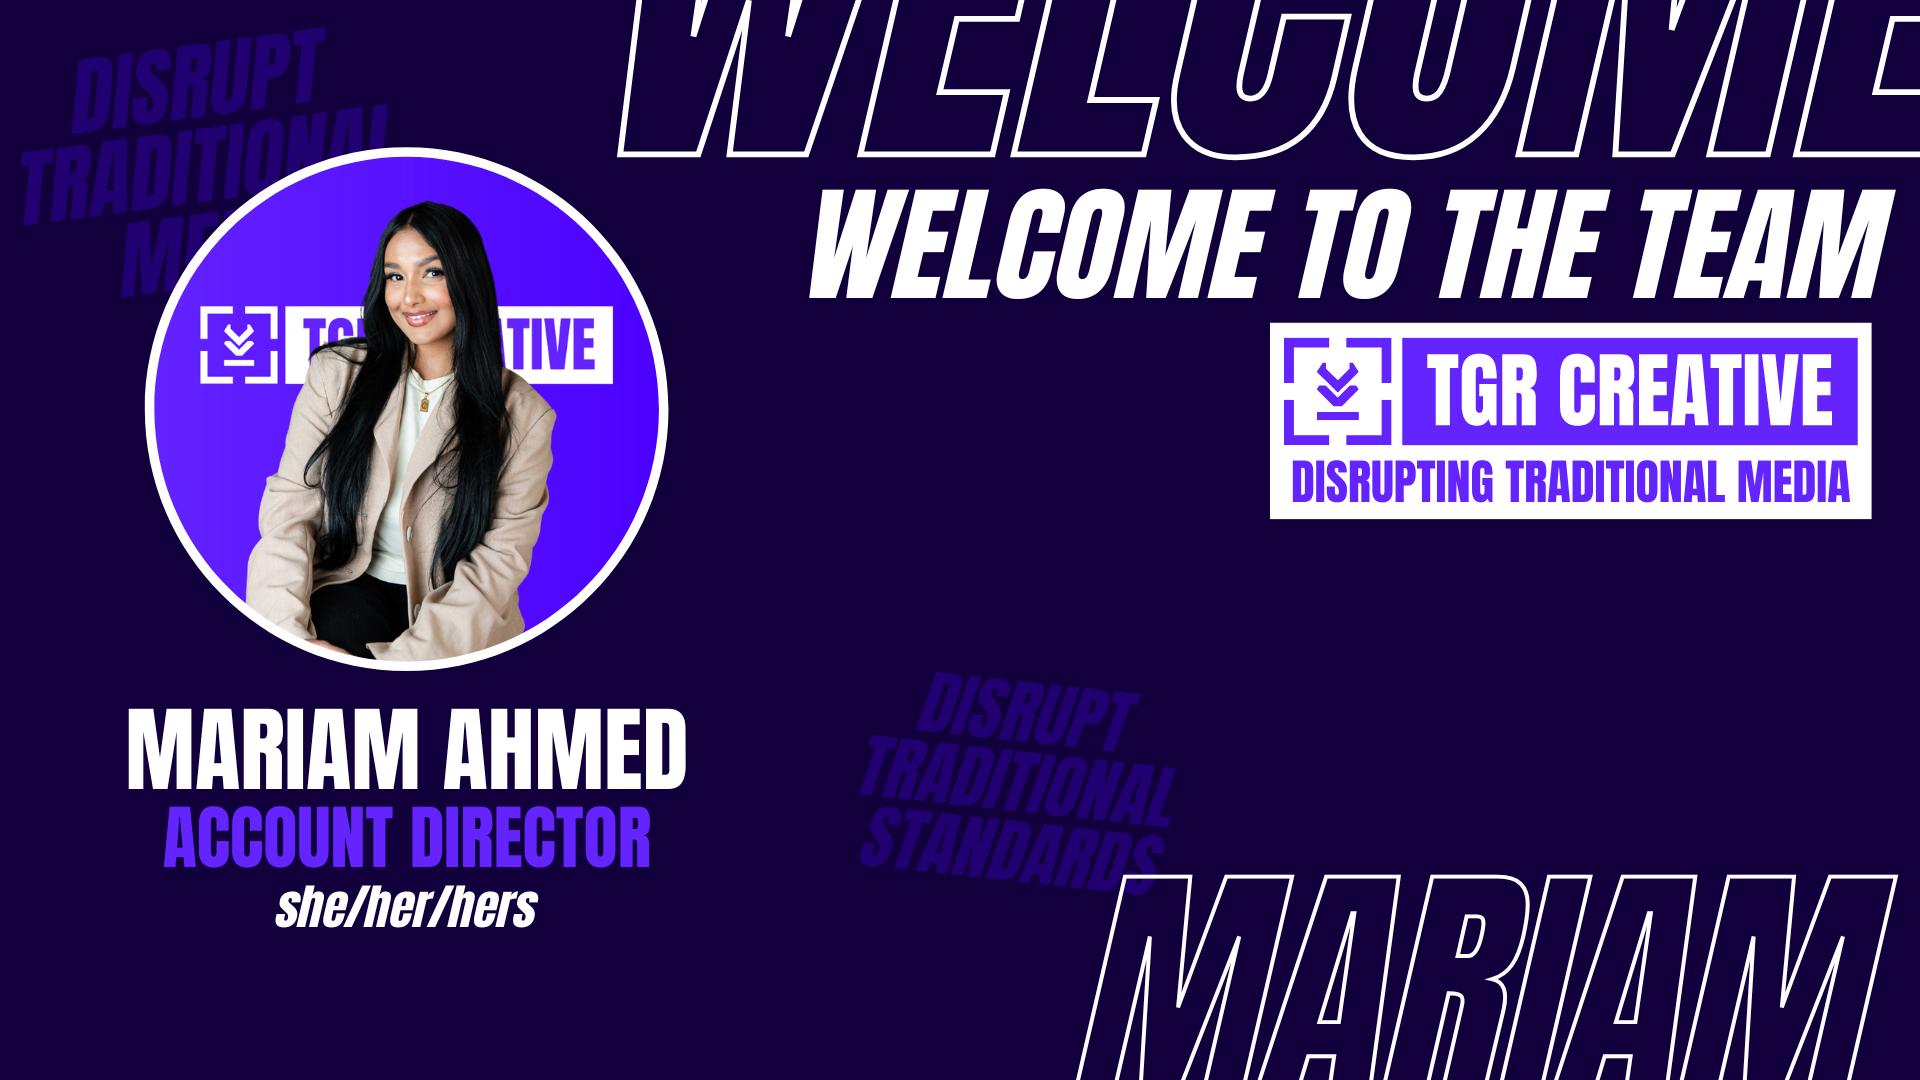 TGR Creative Welcomes Mariam Ahmed as Account Director